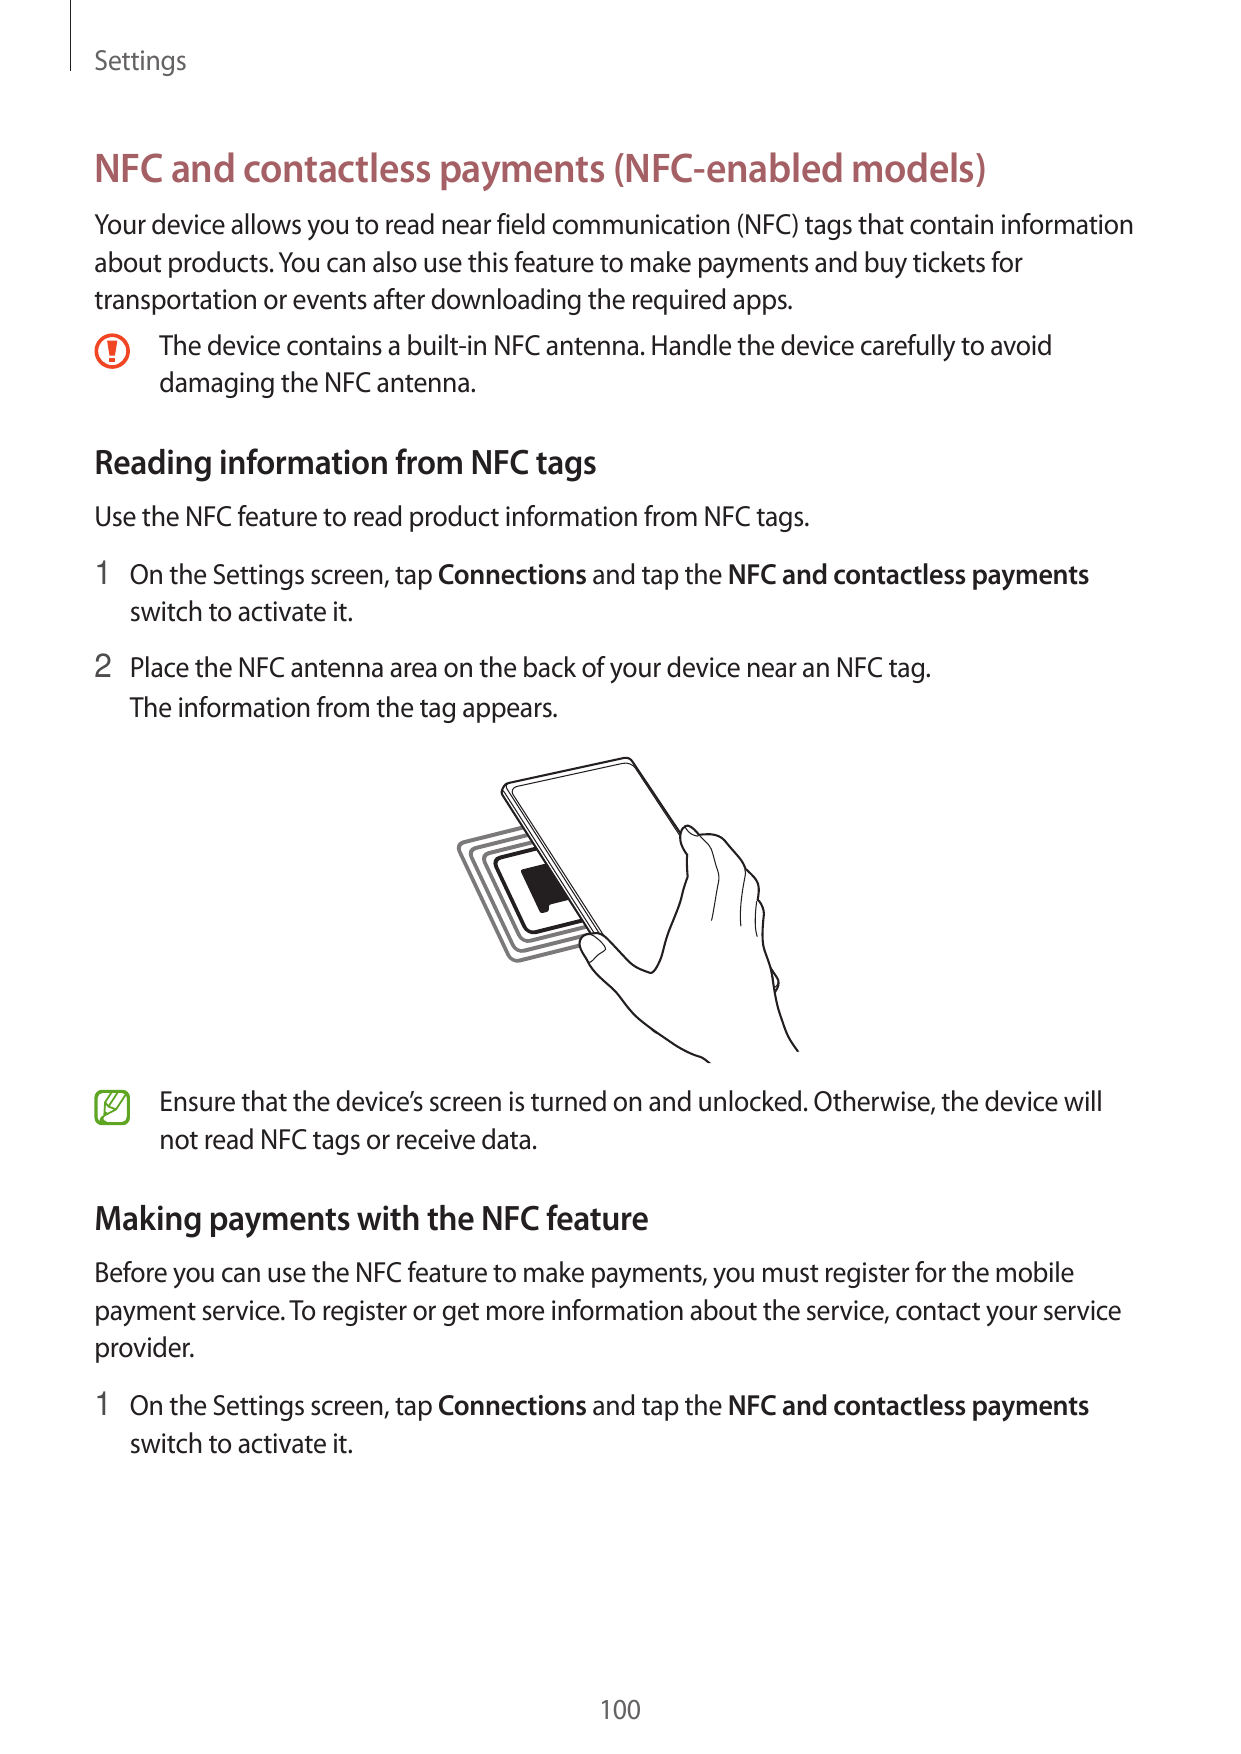 SettingsNFC and contactless payments (NFC-enabled models)Your device allows you to read near field communication (NFC) tags that